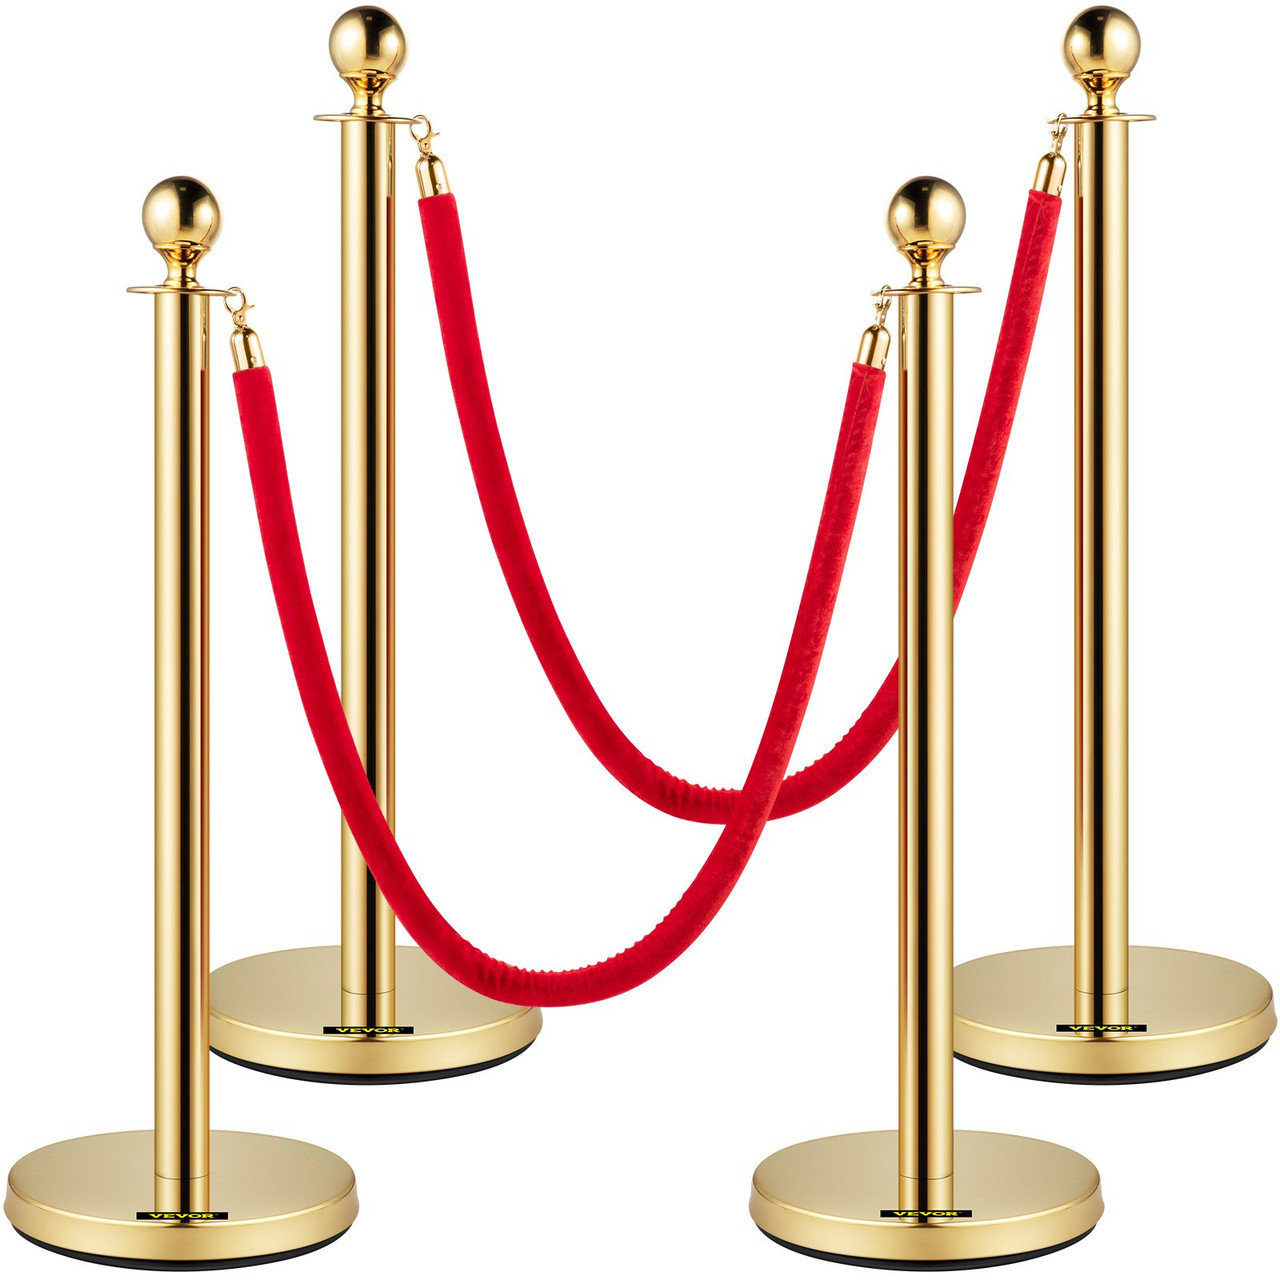 Velvet Ropes and Posts, 5 ft/1.5 m Red Rope, Stainless Steel Gold Stanchion with Ball Top, Red Crowd Control Barrier Used for Theaters, Party, Wedding, Exhibition, Ticket Offices 4 packSets